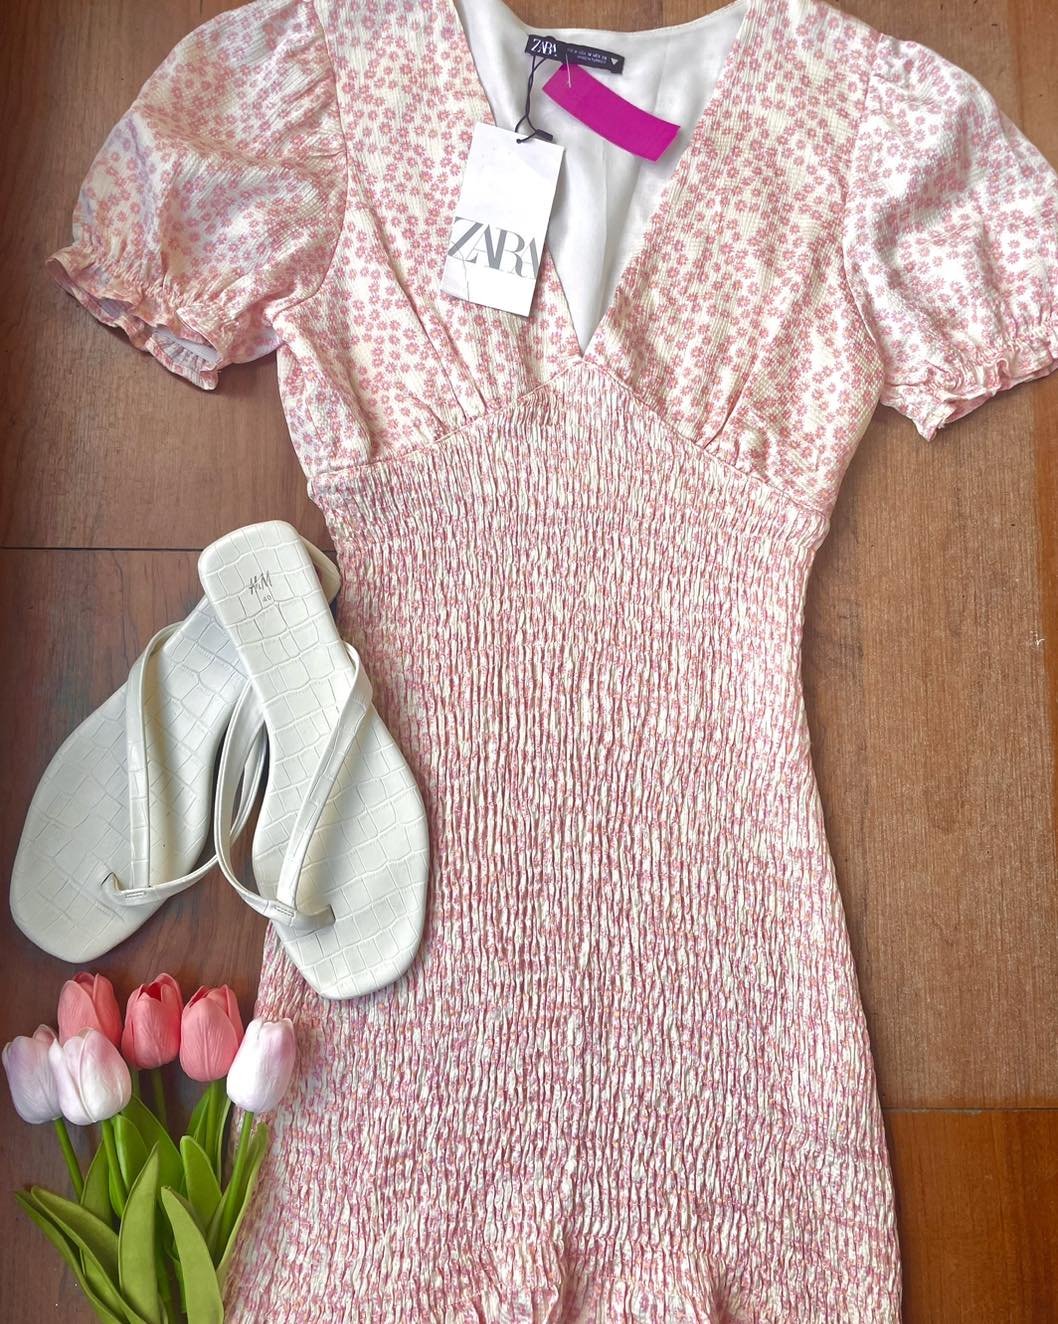 Adorable Zara Dress NWT&rsquo;s!!🤩🌸

Perfect for the summer time, make this dress yours today! 🛍️ Call or stop in we&rsquo;re open till 6pm!
&bull;
&bull;
&bull;
Dress: medium, $17.49
Shoes: 9, $7.99